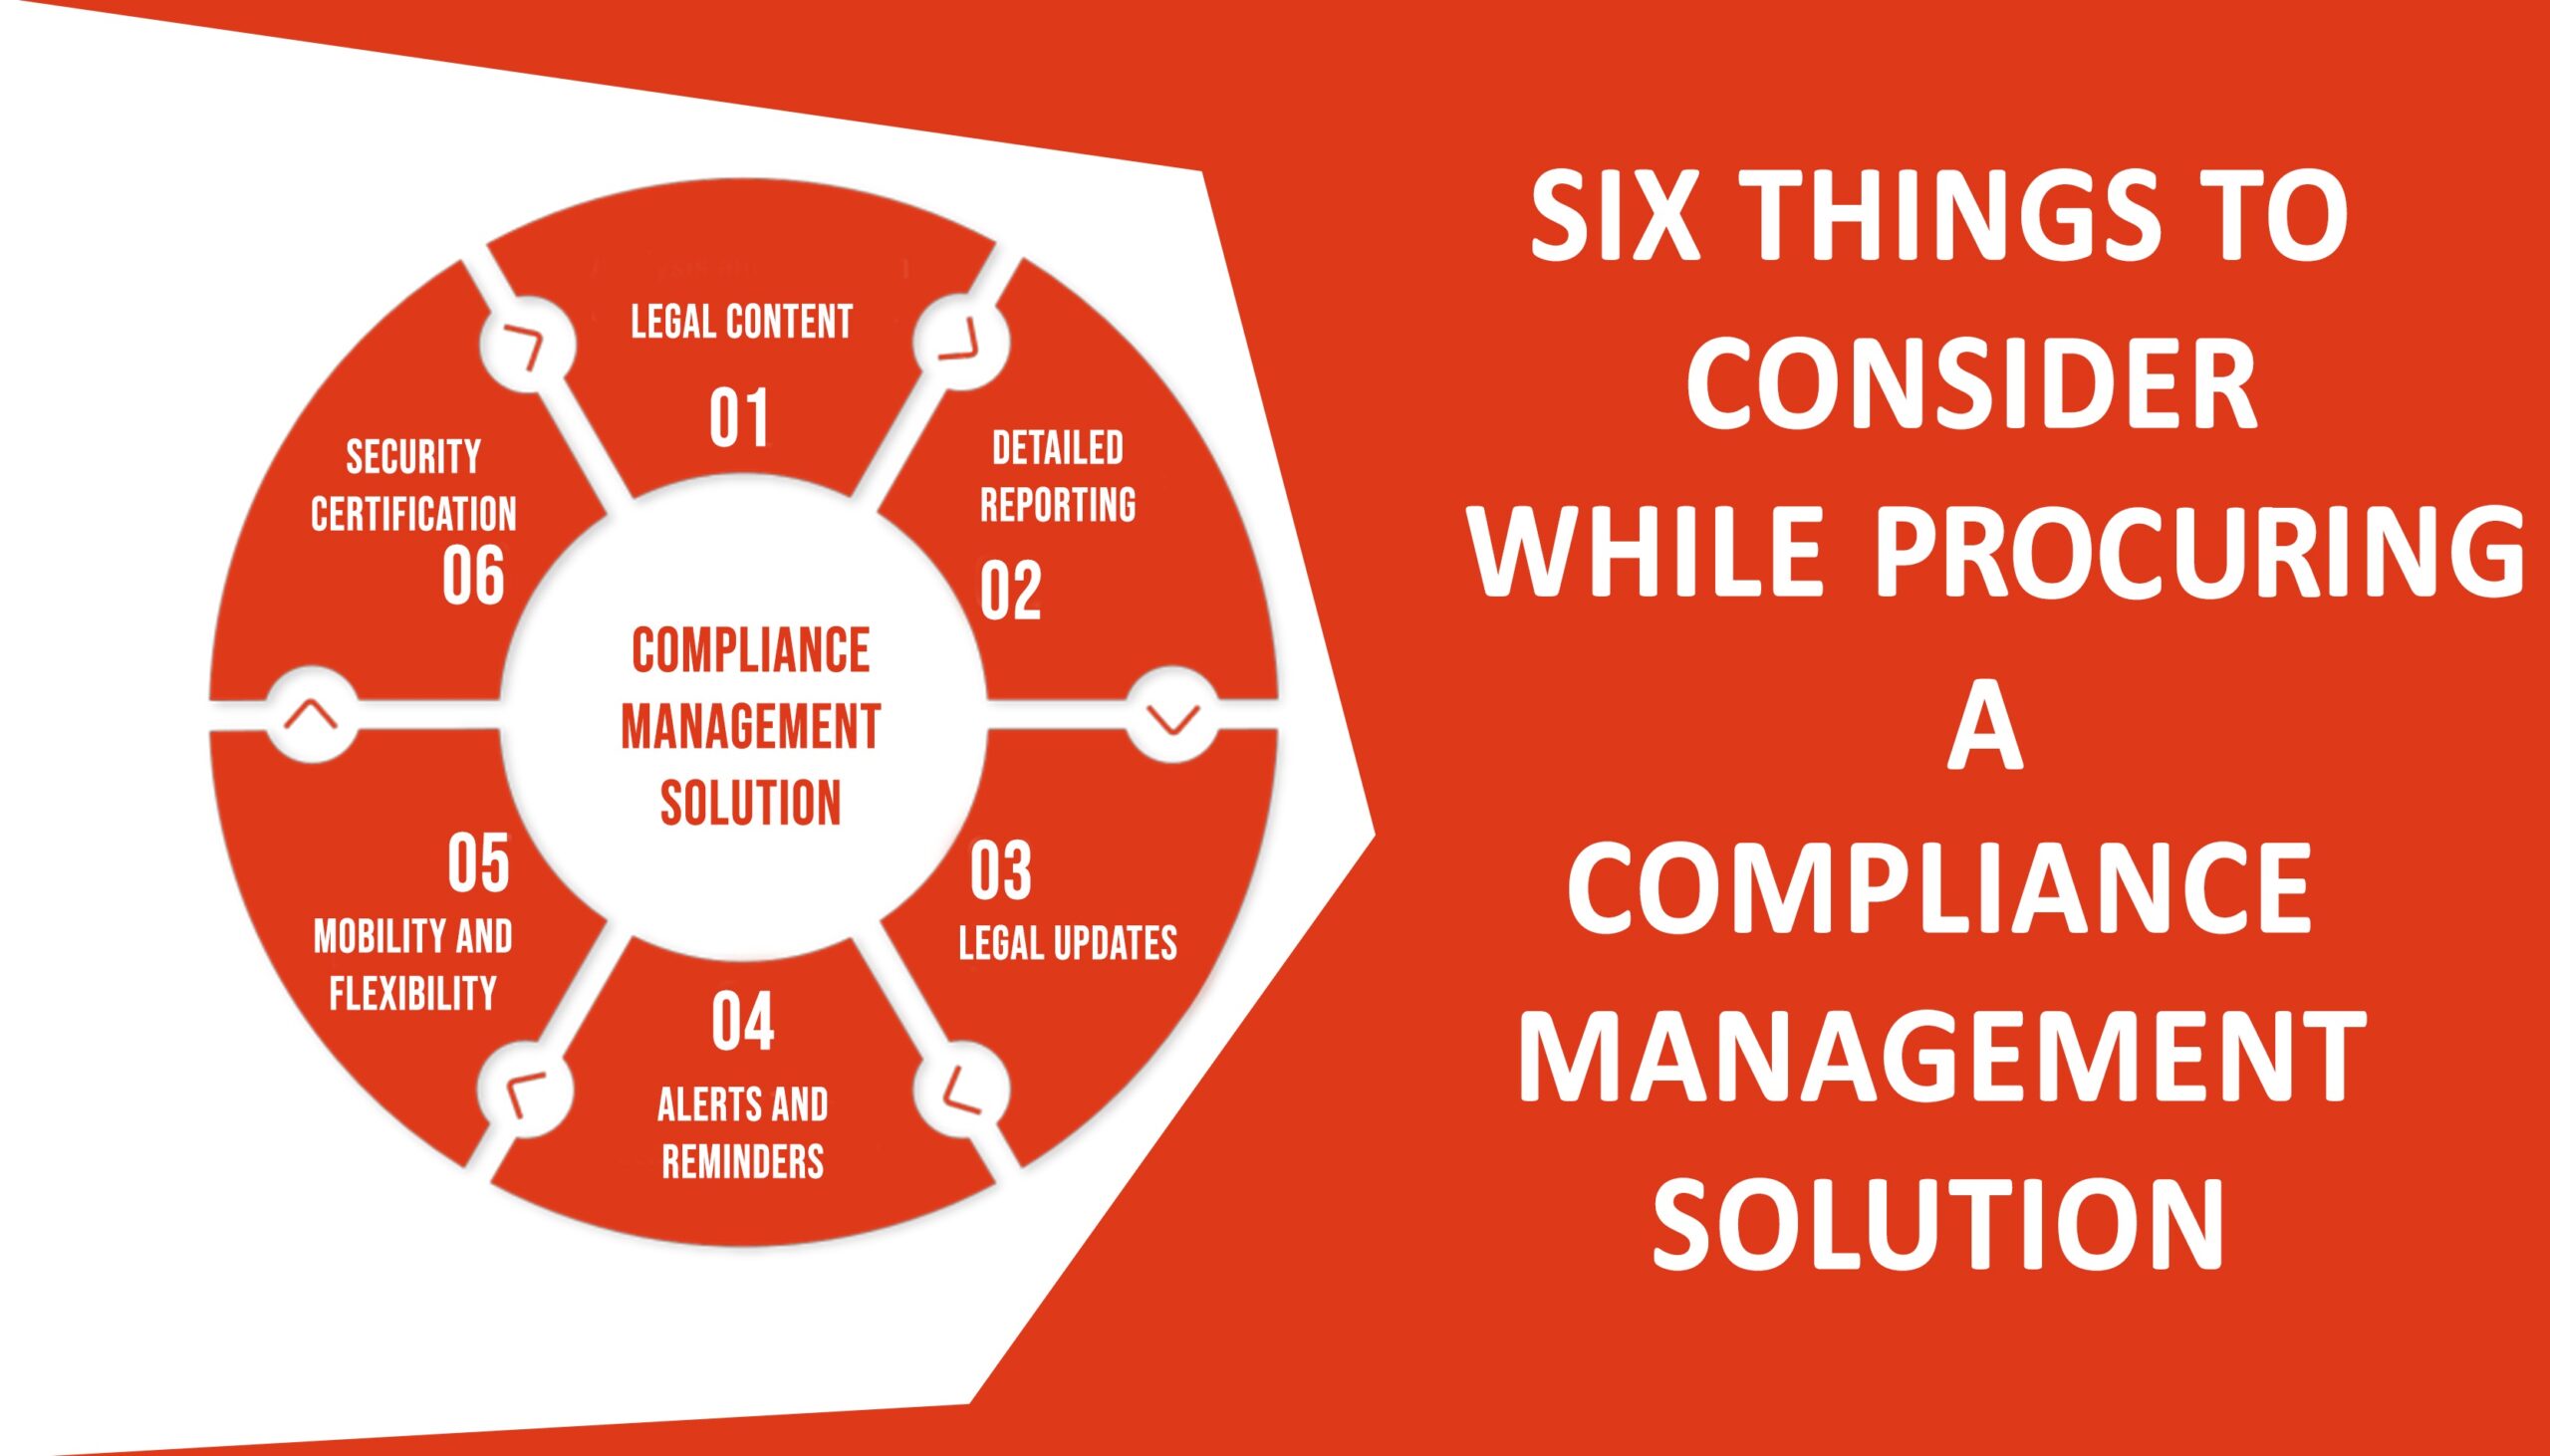 Six Things to Consider While Procuring a Compliance Management Solution